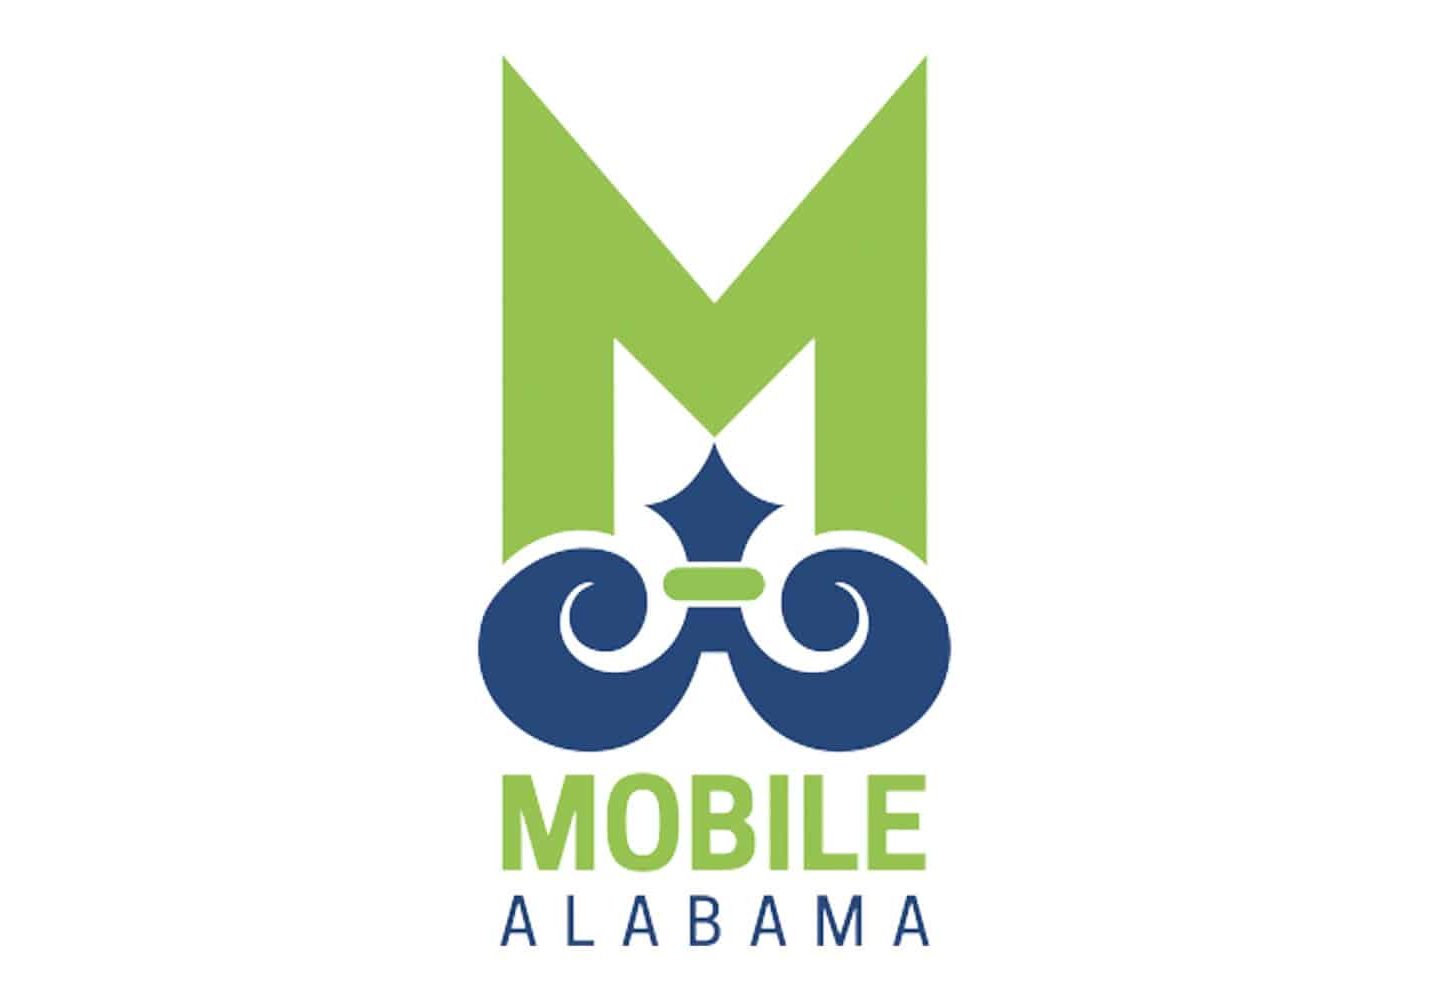 Mobile Opens Disaster Readiness Survey